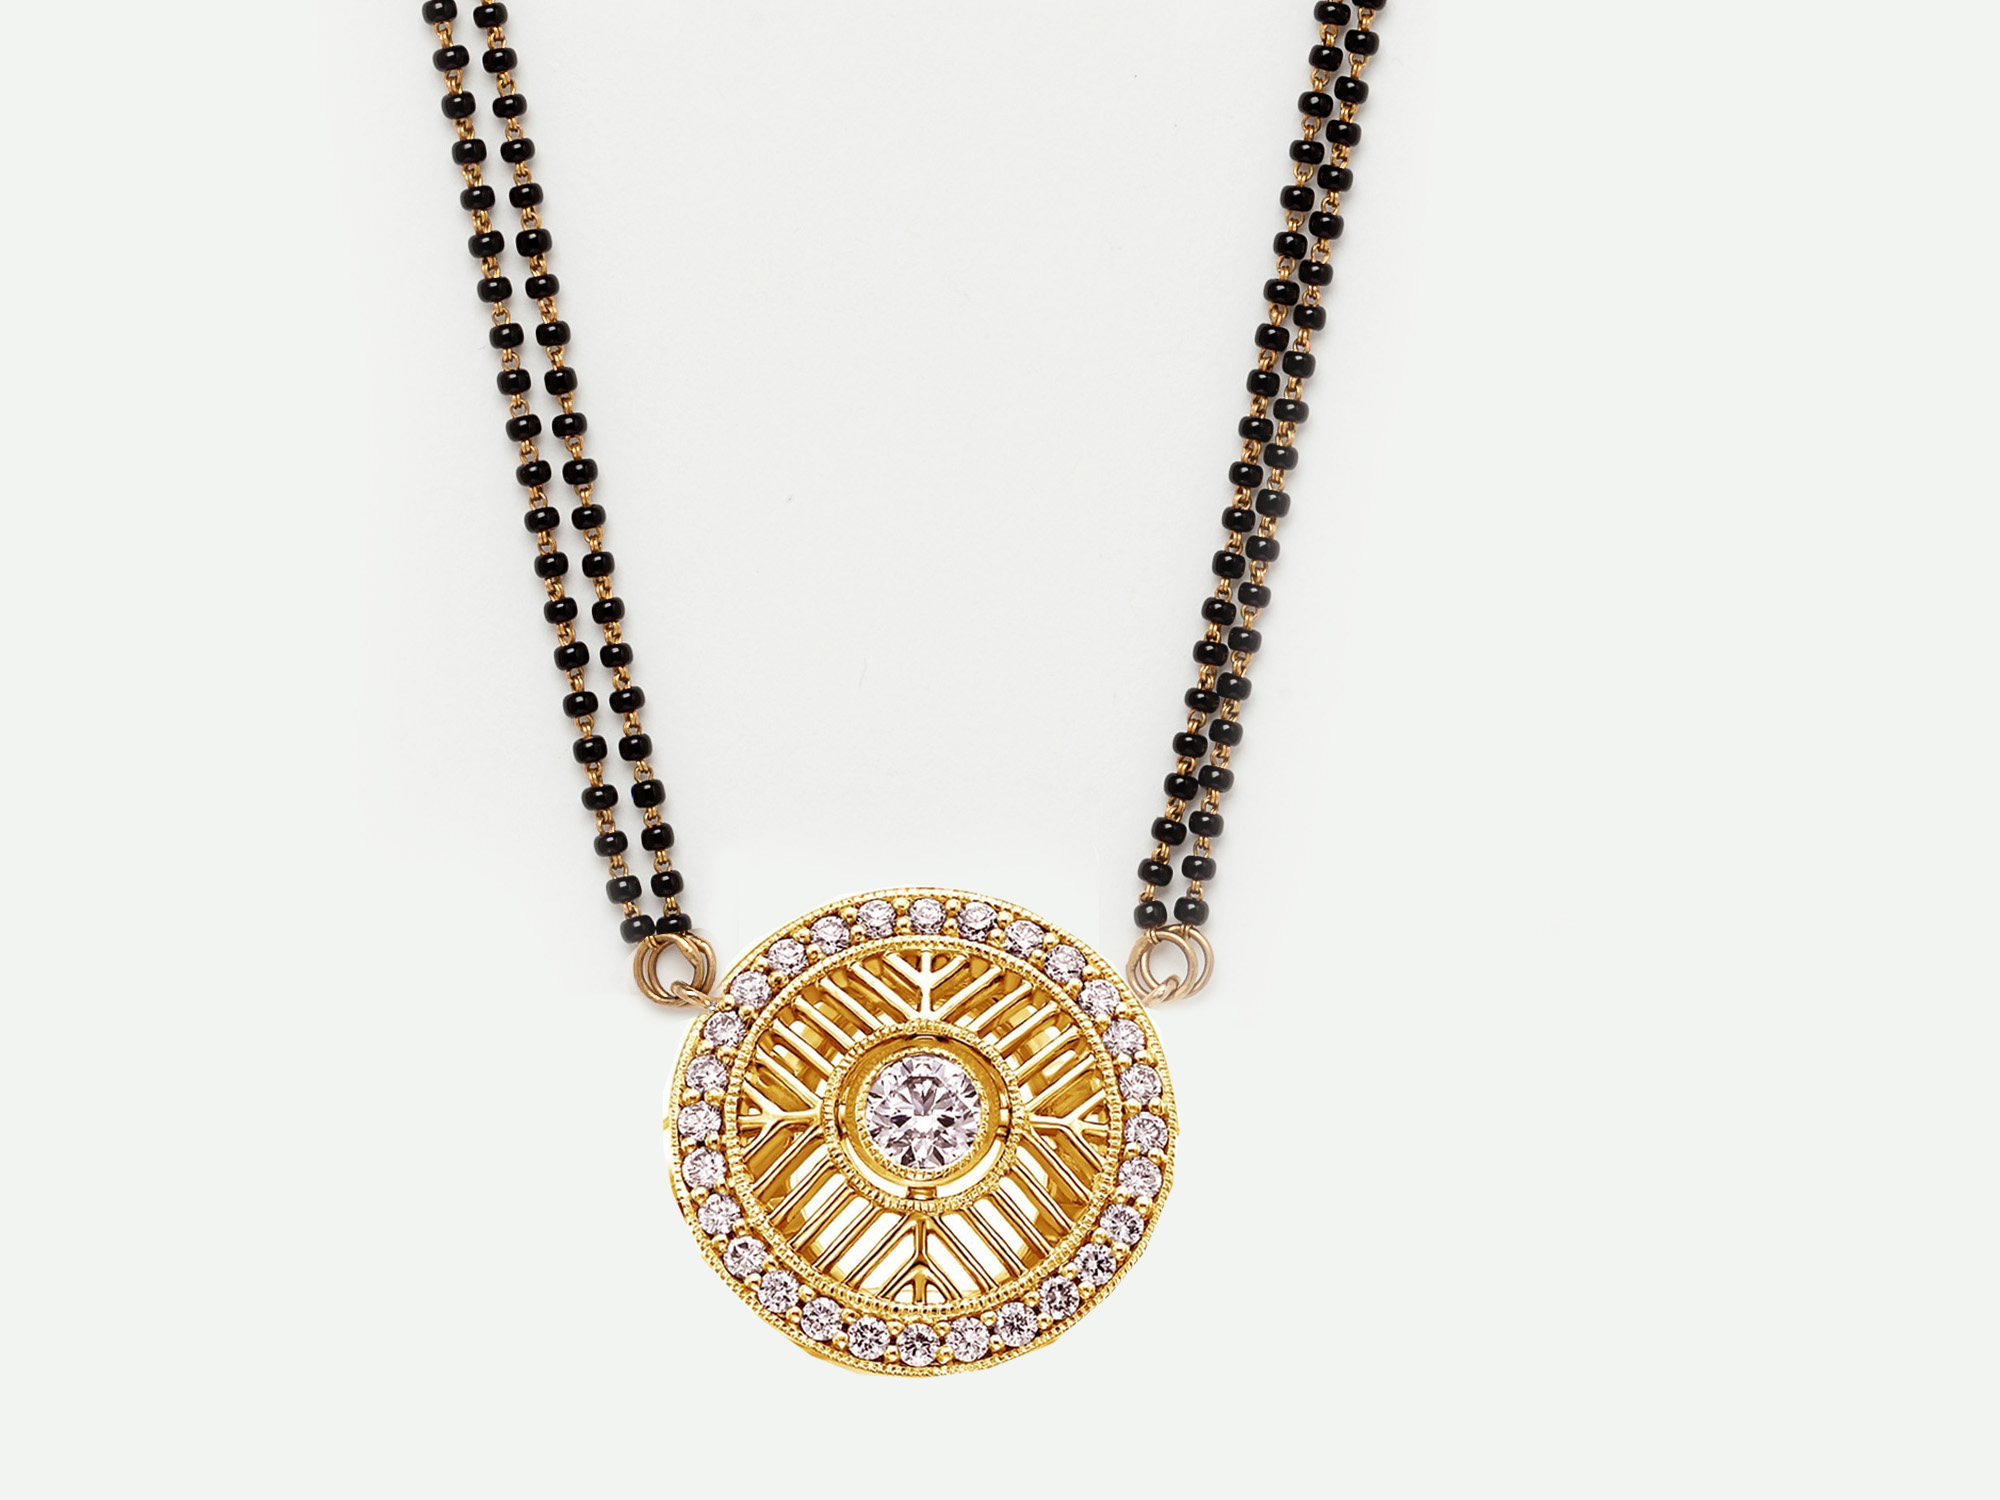 Mangalsutra with round pendant